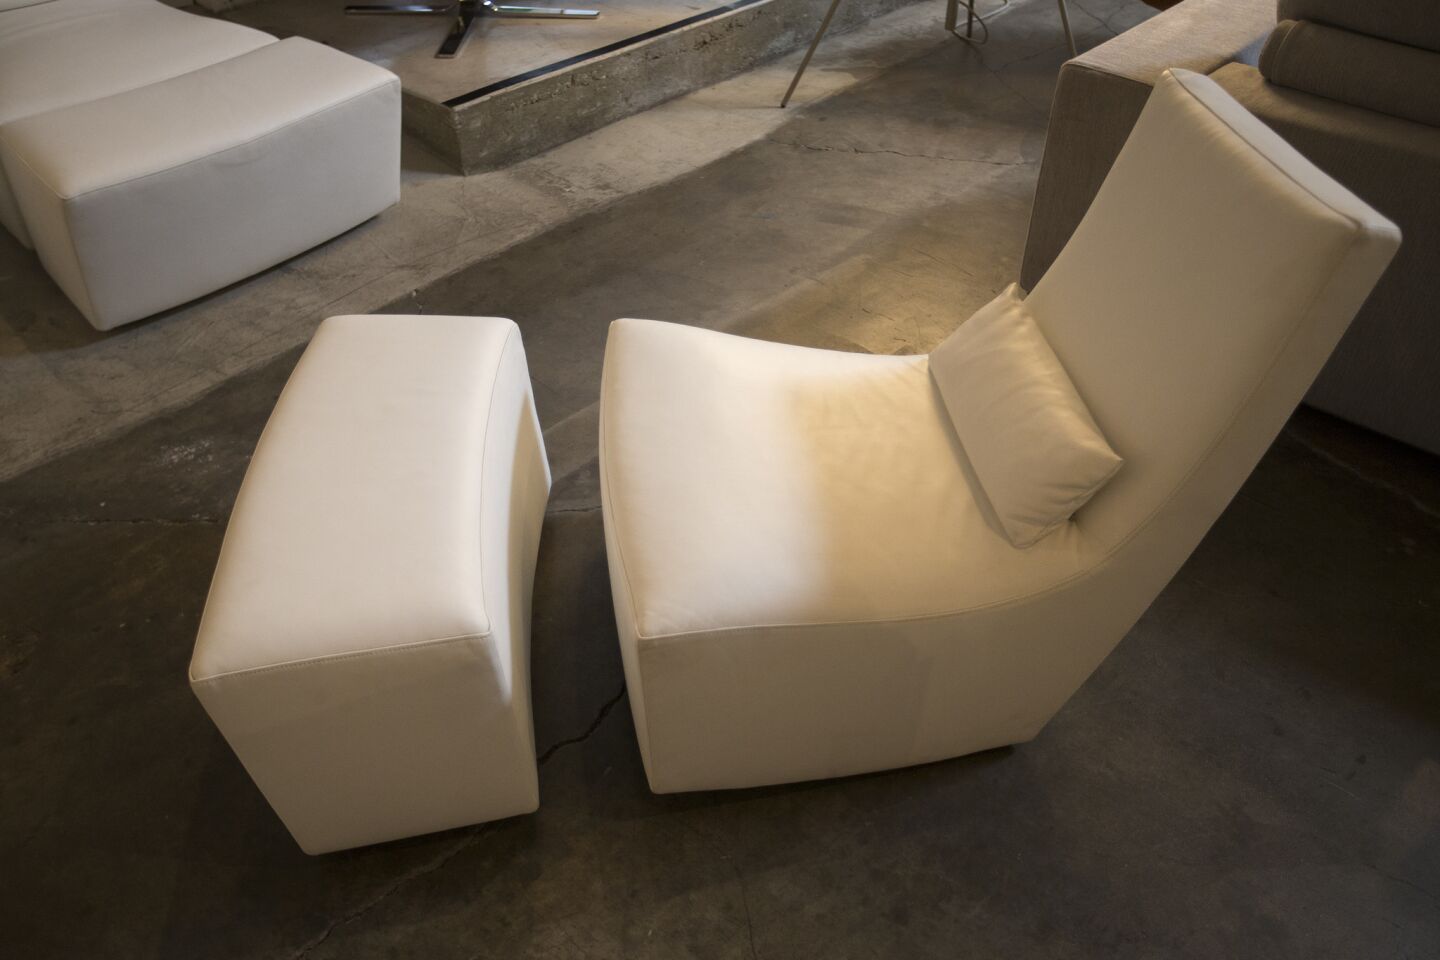 Modern Resale carries second-hand furnishings, lighting and accessories made by well-respected European brands such as B&B Italia, Cappellini and Lignet Roset.